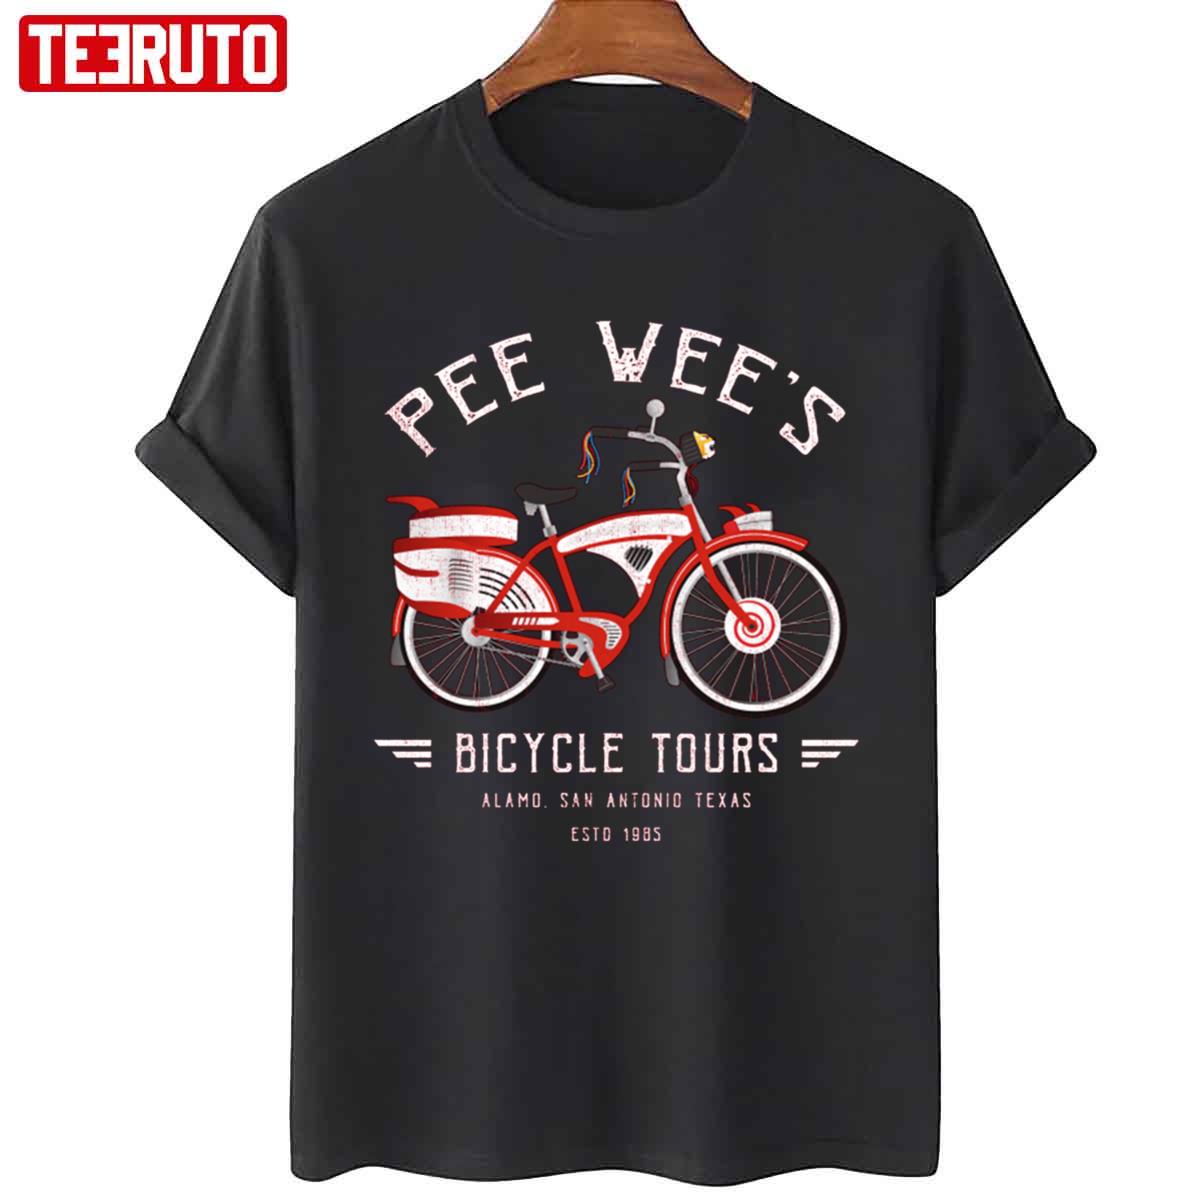 Pee Wee’s Bicycle Tours Unisex T-Shirt